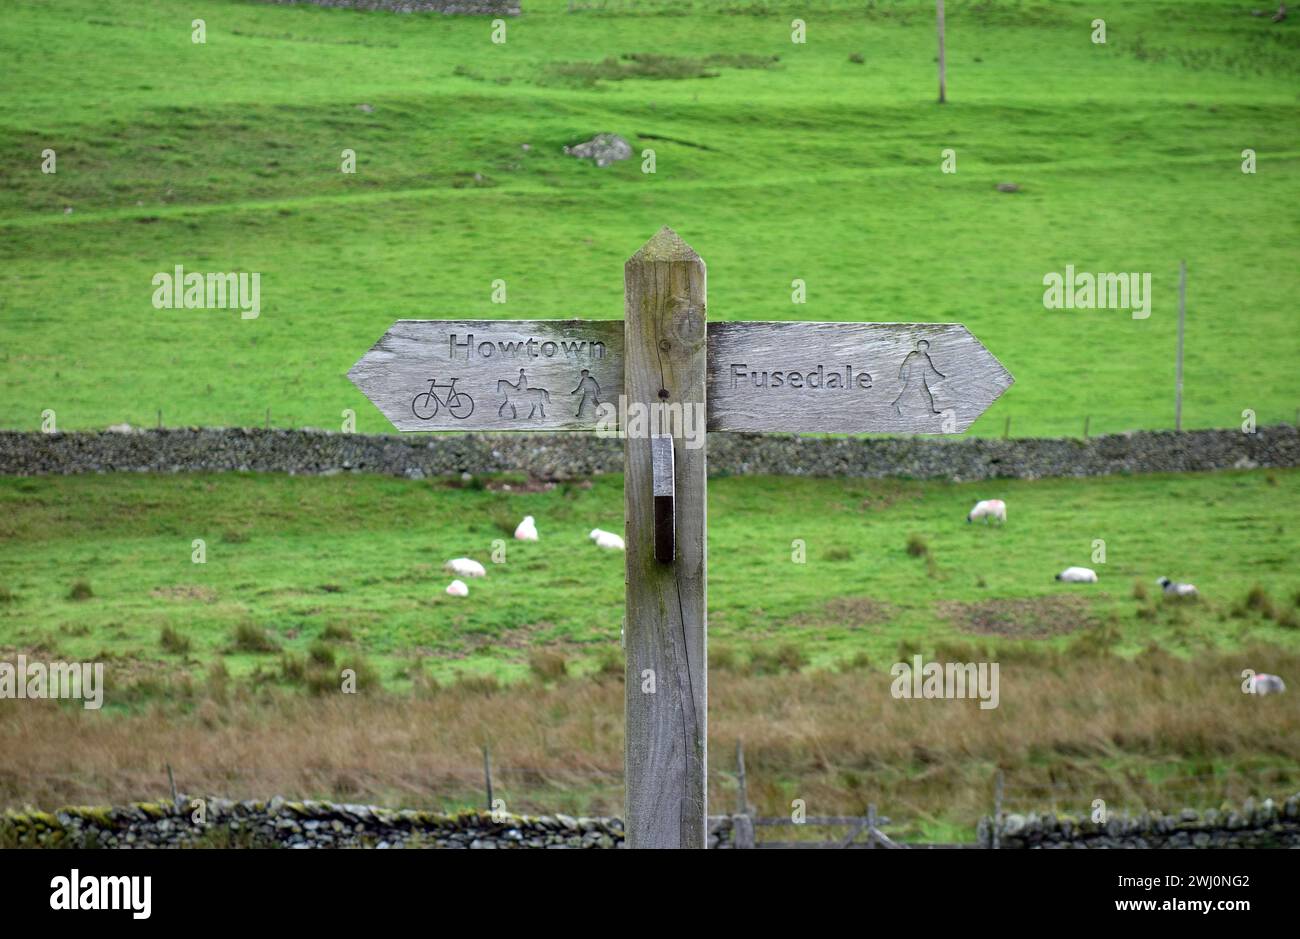 Wooden Signpost for Howtown & Fusedale near Martindale, Ullswater, Lake District National Park, Cumbria, England, UK. Stock Photo